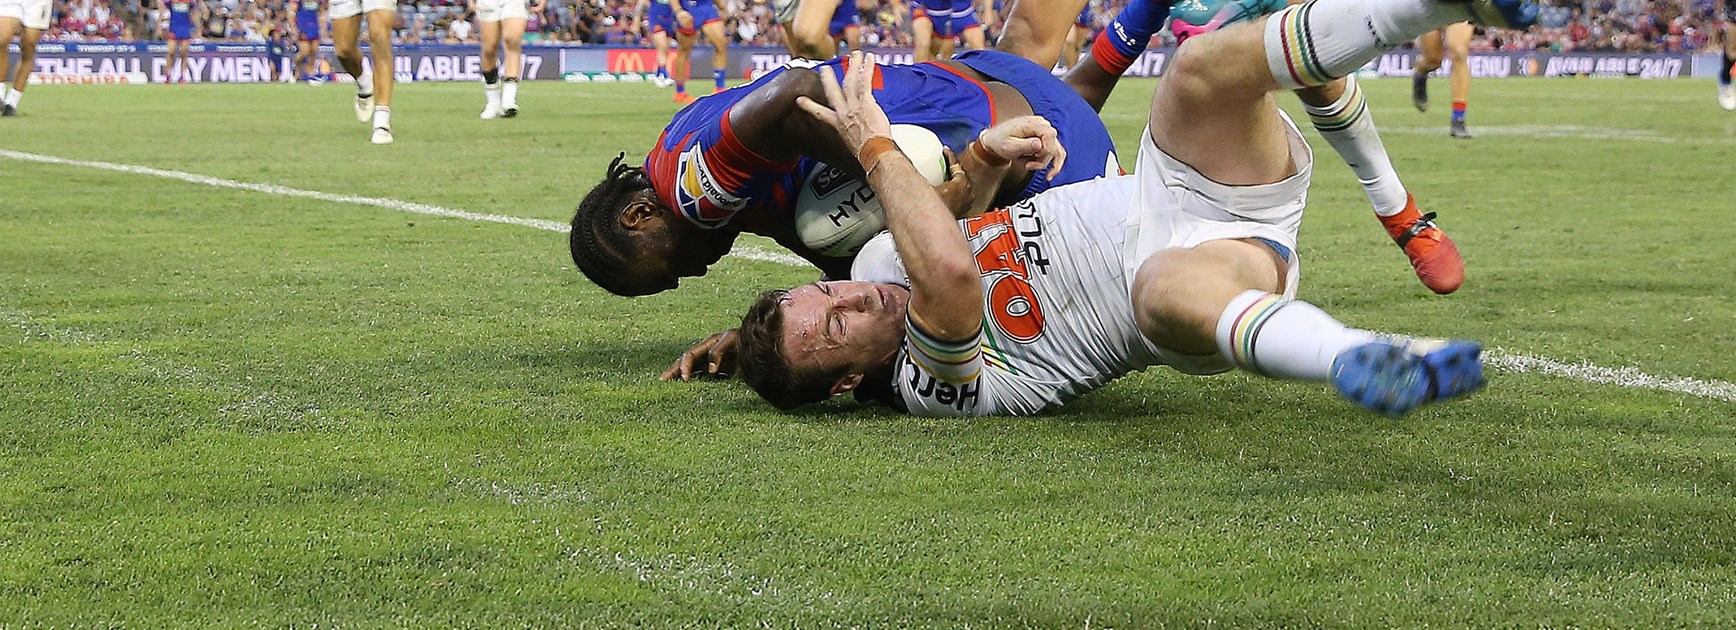 Tackle of the Week: Round 2 - Maloney's win silences critics